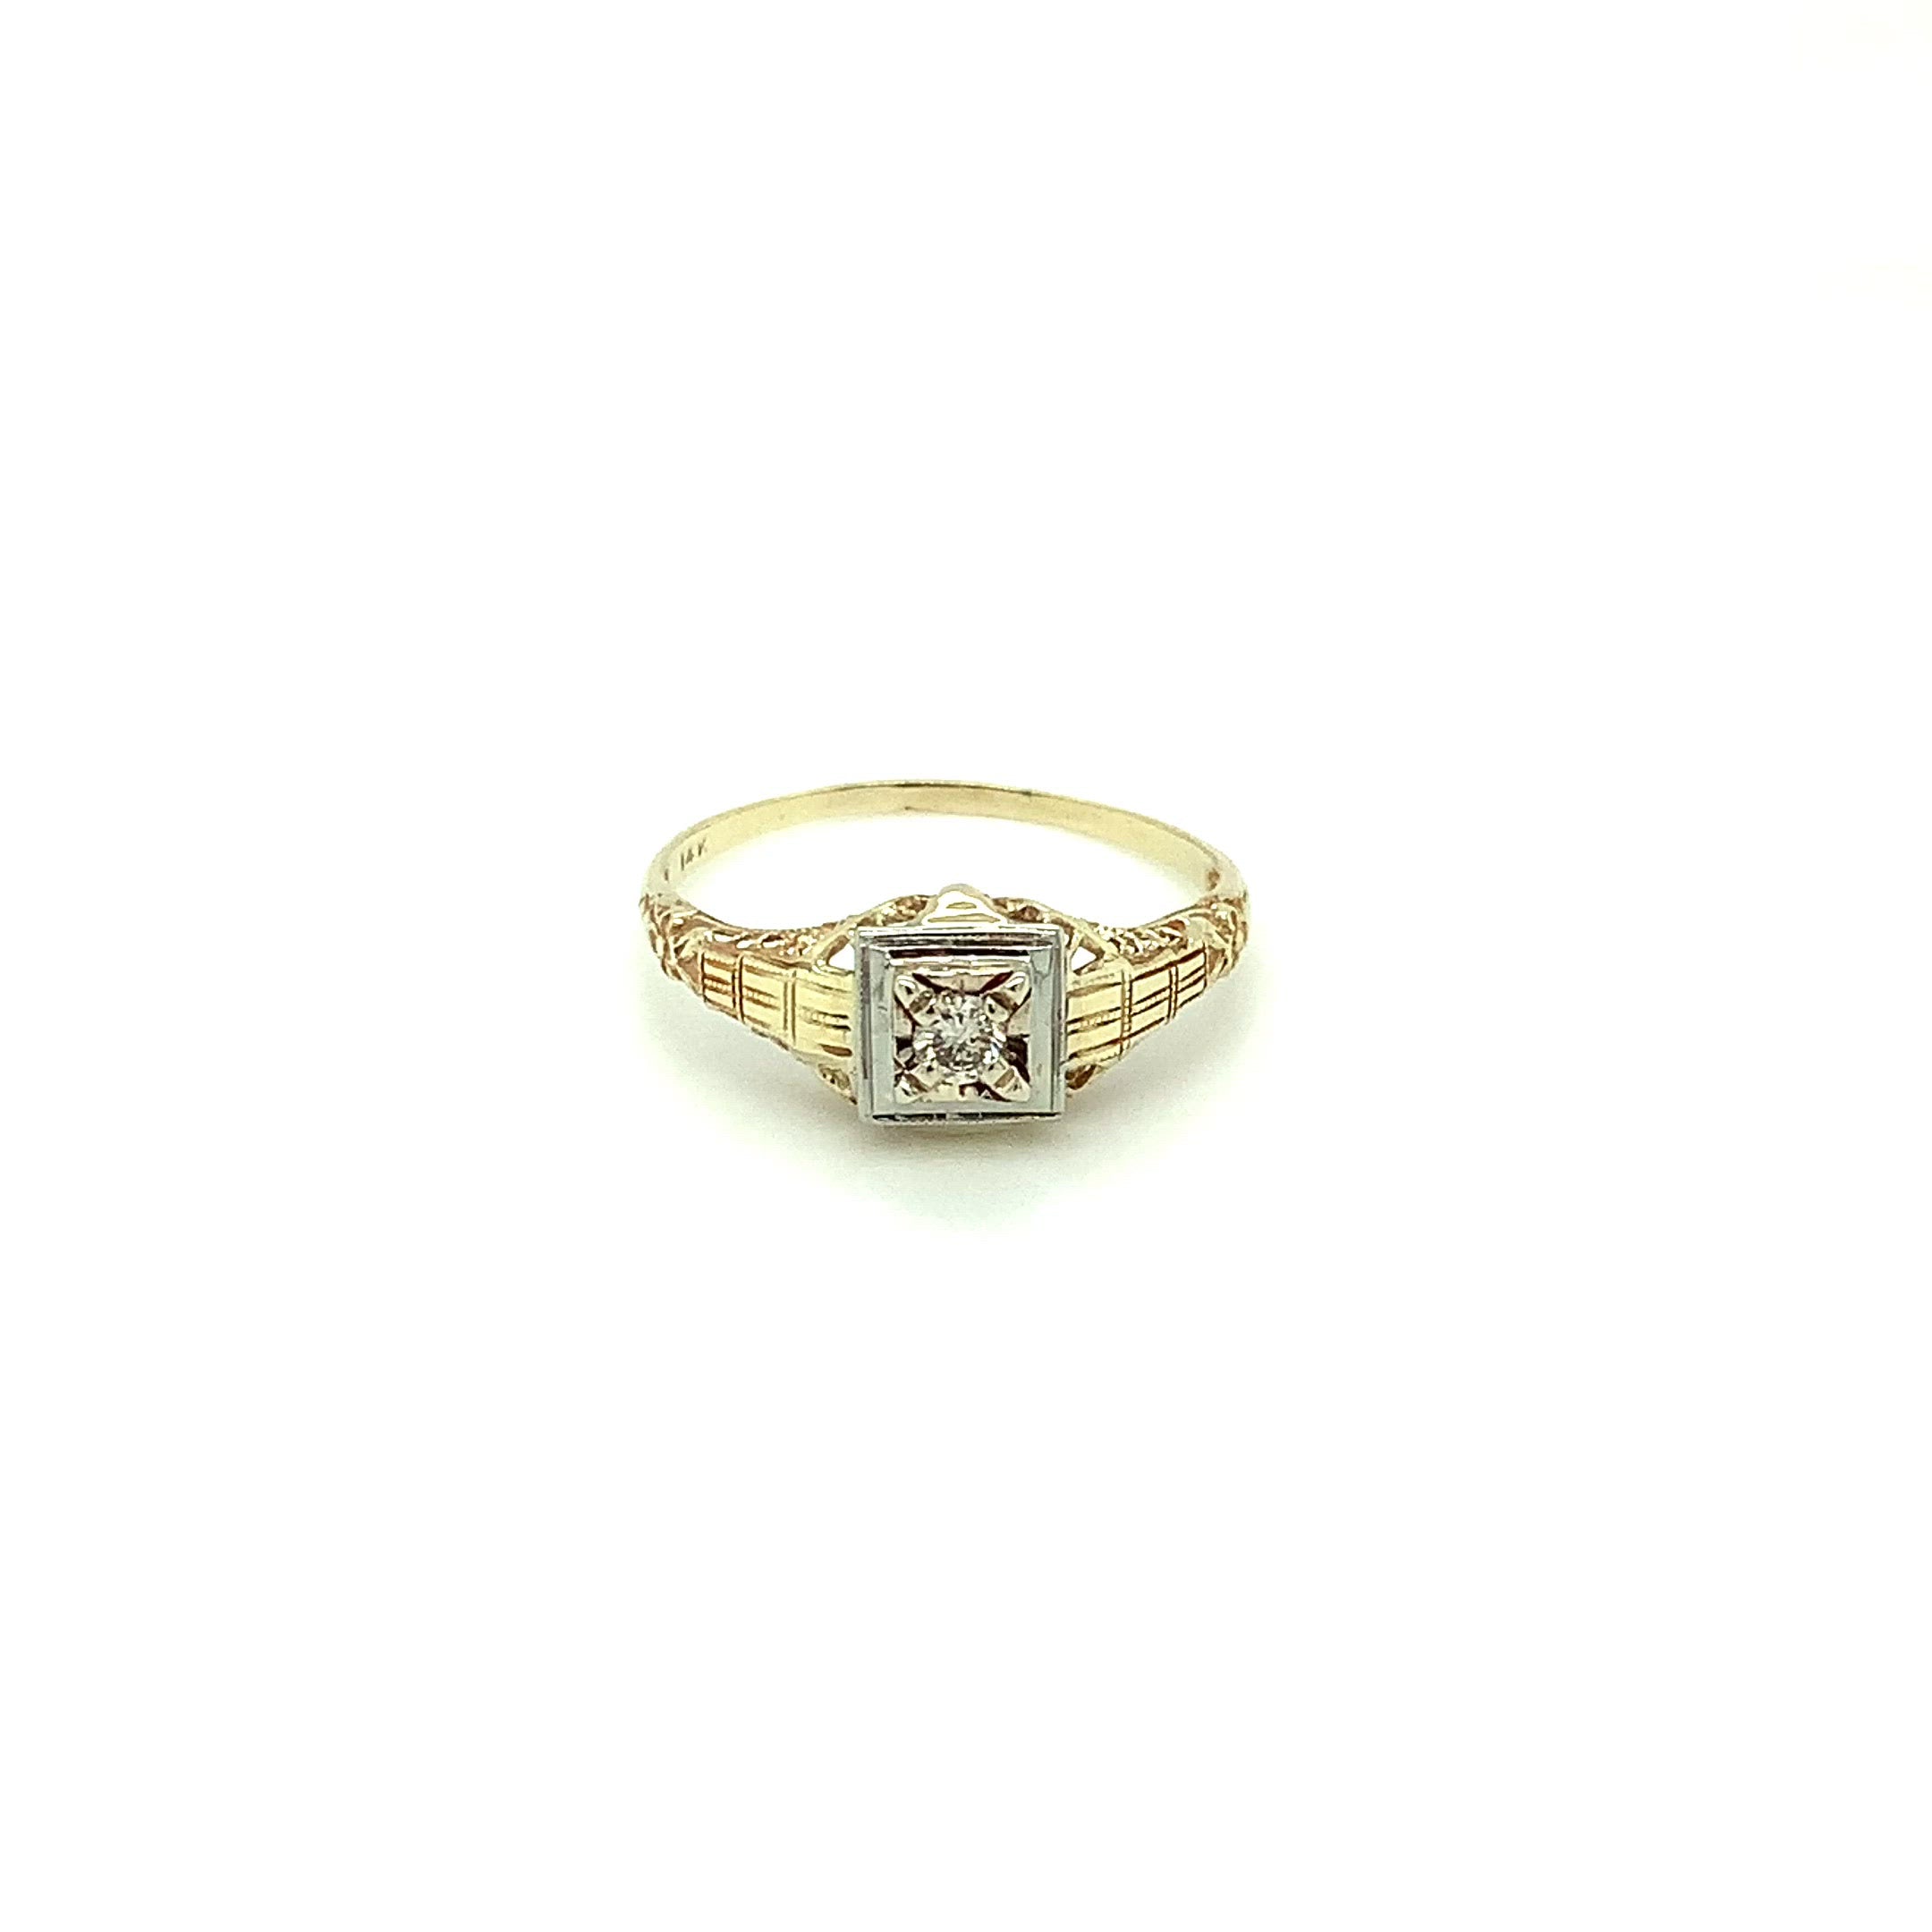 Natural Diamond Ring 14K Solid Gold .13ct Engagement Ring Antique Ring Solitaire Ring Estate Ring Art Deco Ring Bridal Vintage Jewellery